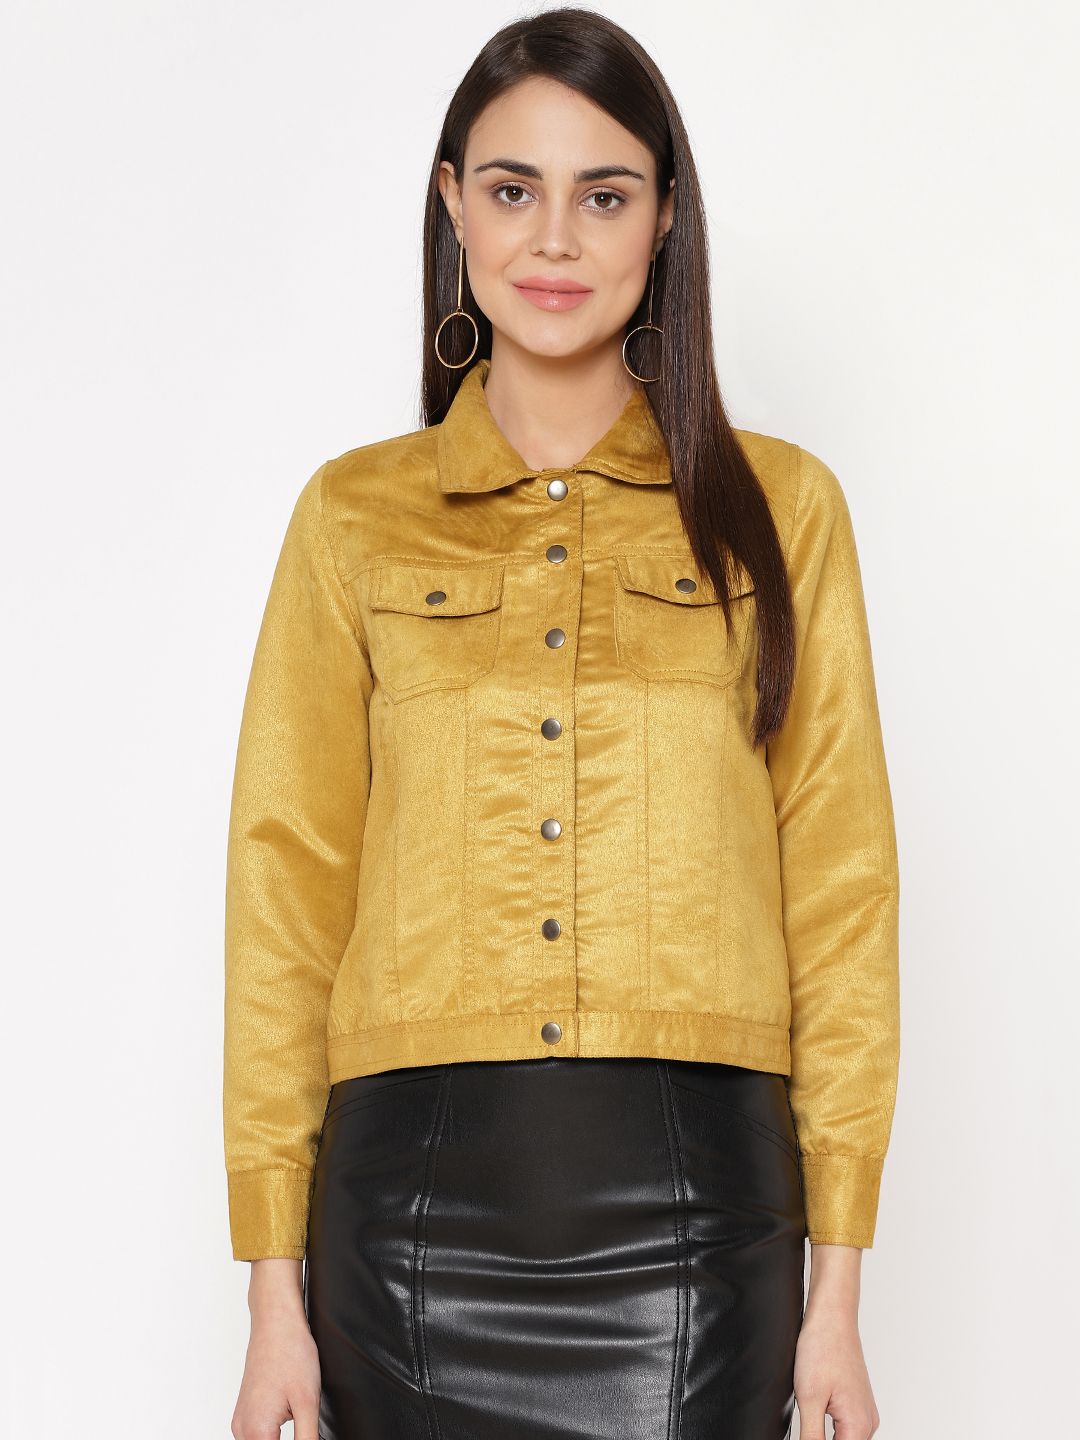 Carlton London Women Mustard Yellow Solid Tailored Jacket With Suede Finish Price in India